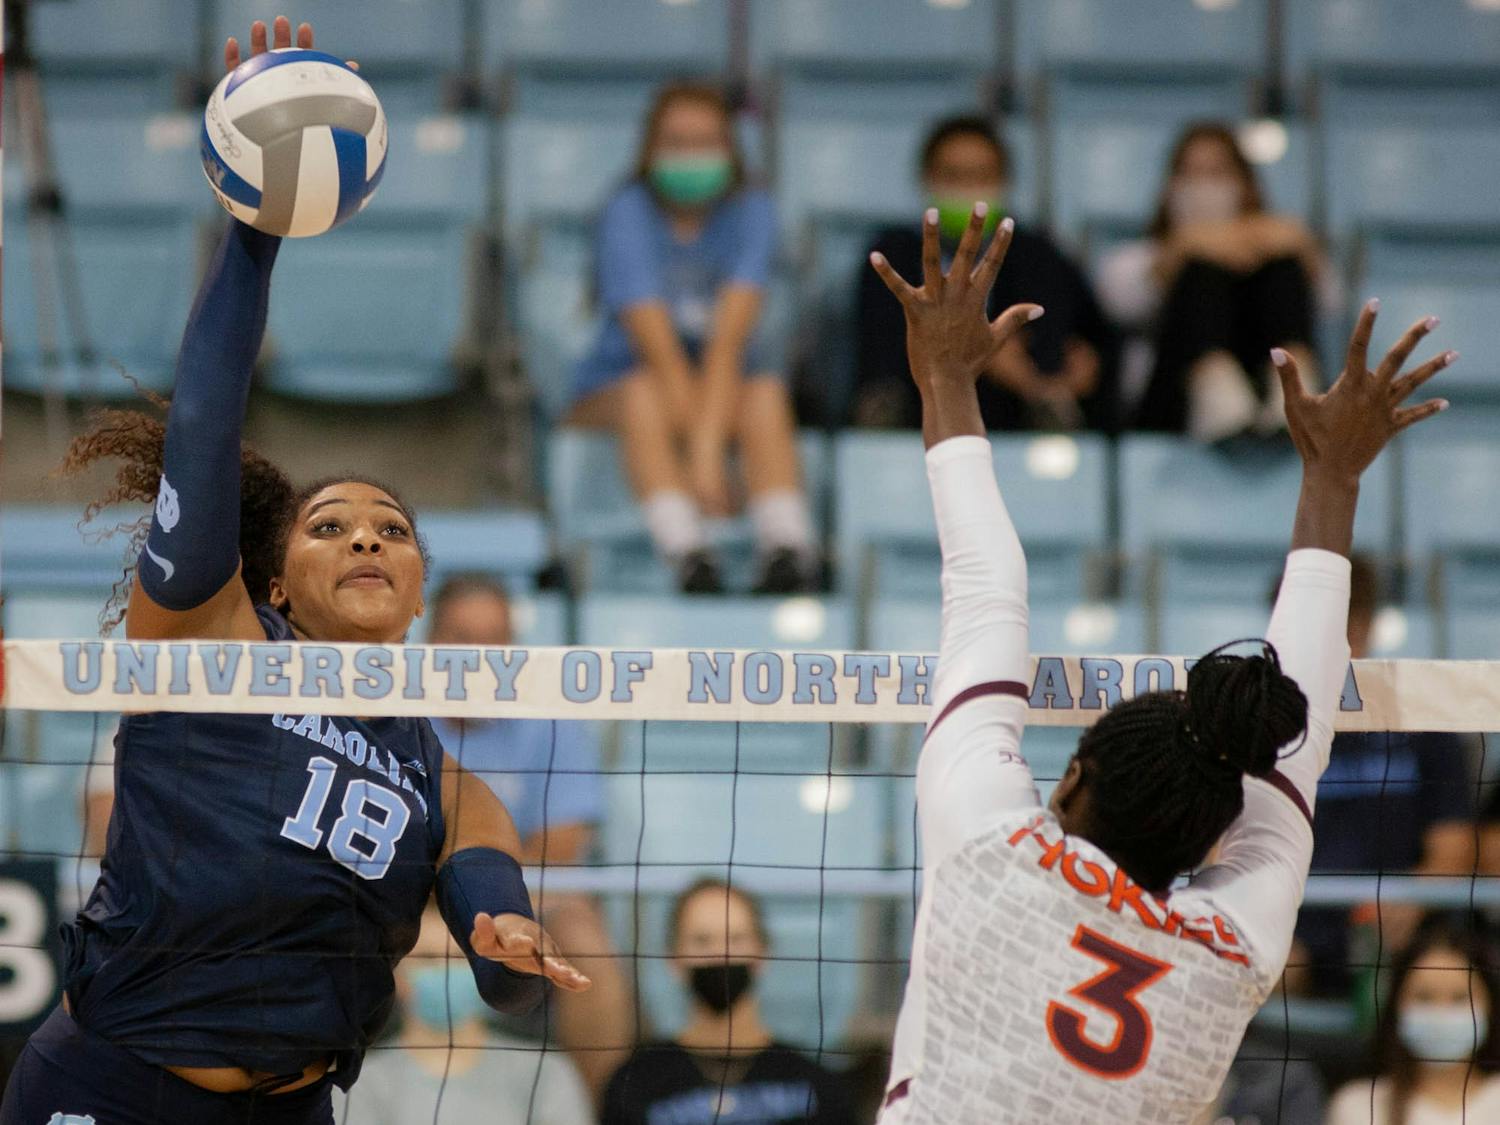 Graduate outside hitter Nia Robinson (18) spikes the ball in the UNC Women's volleyball game against Virginia Tech at the Woolen Gymnasium on Oct. 10. The Heels won 3-0.